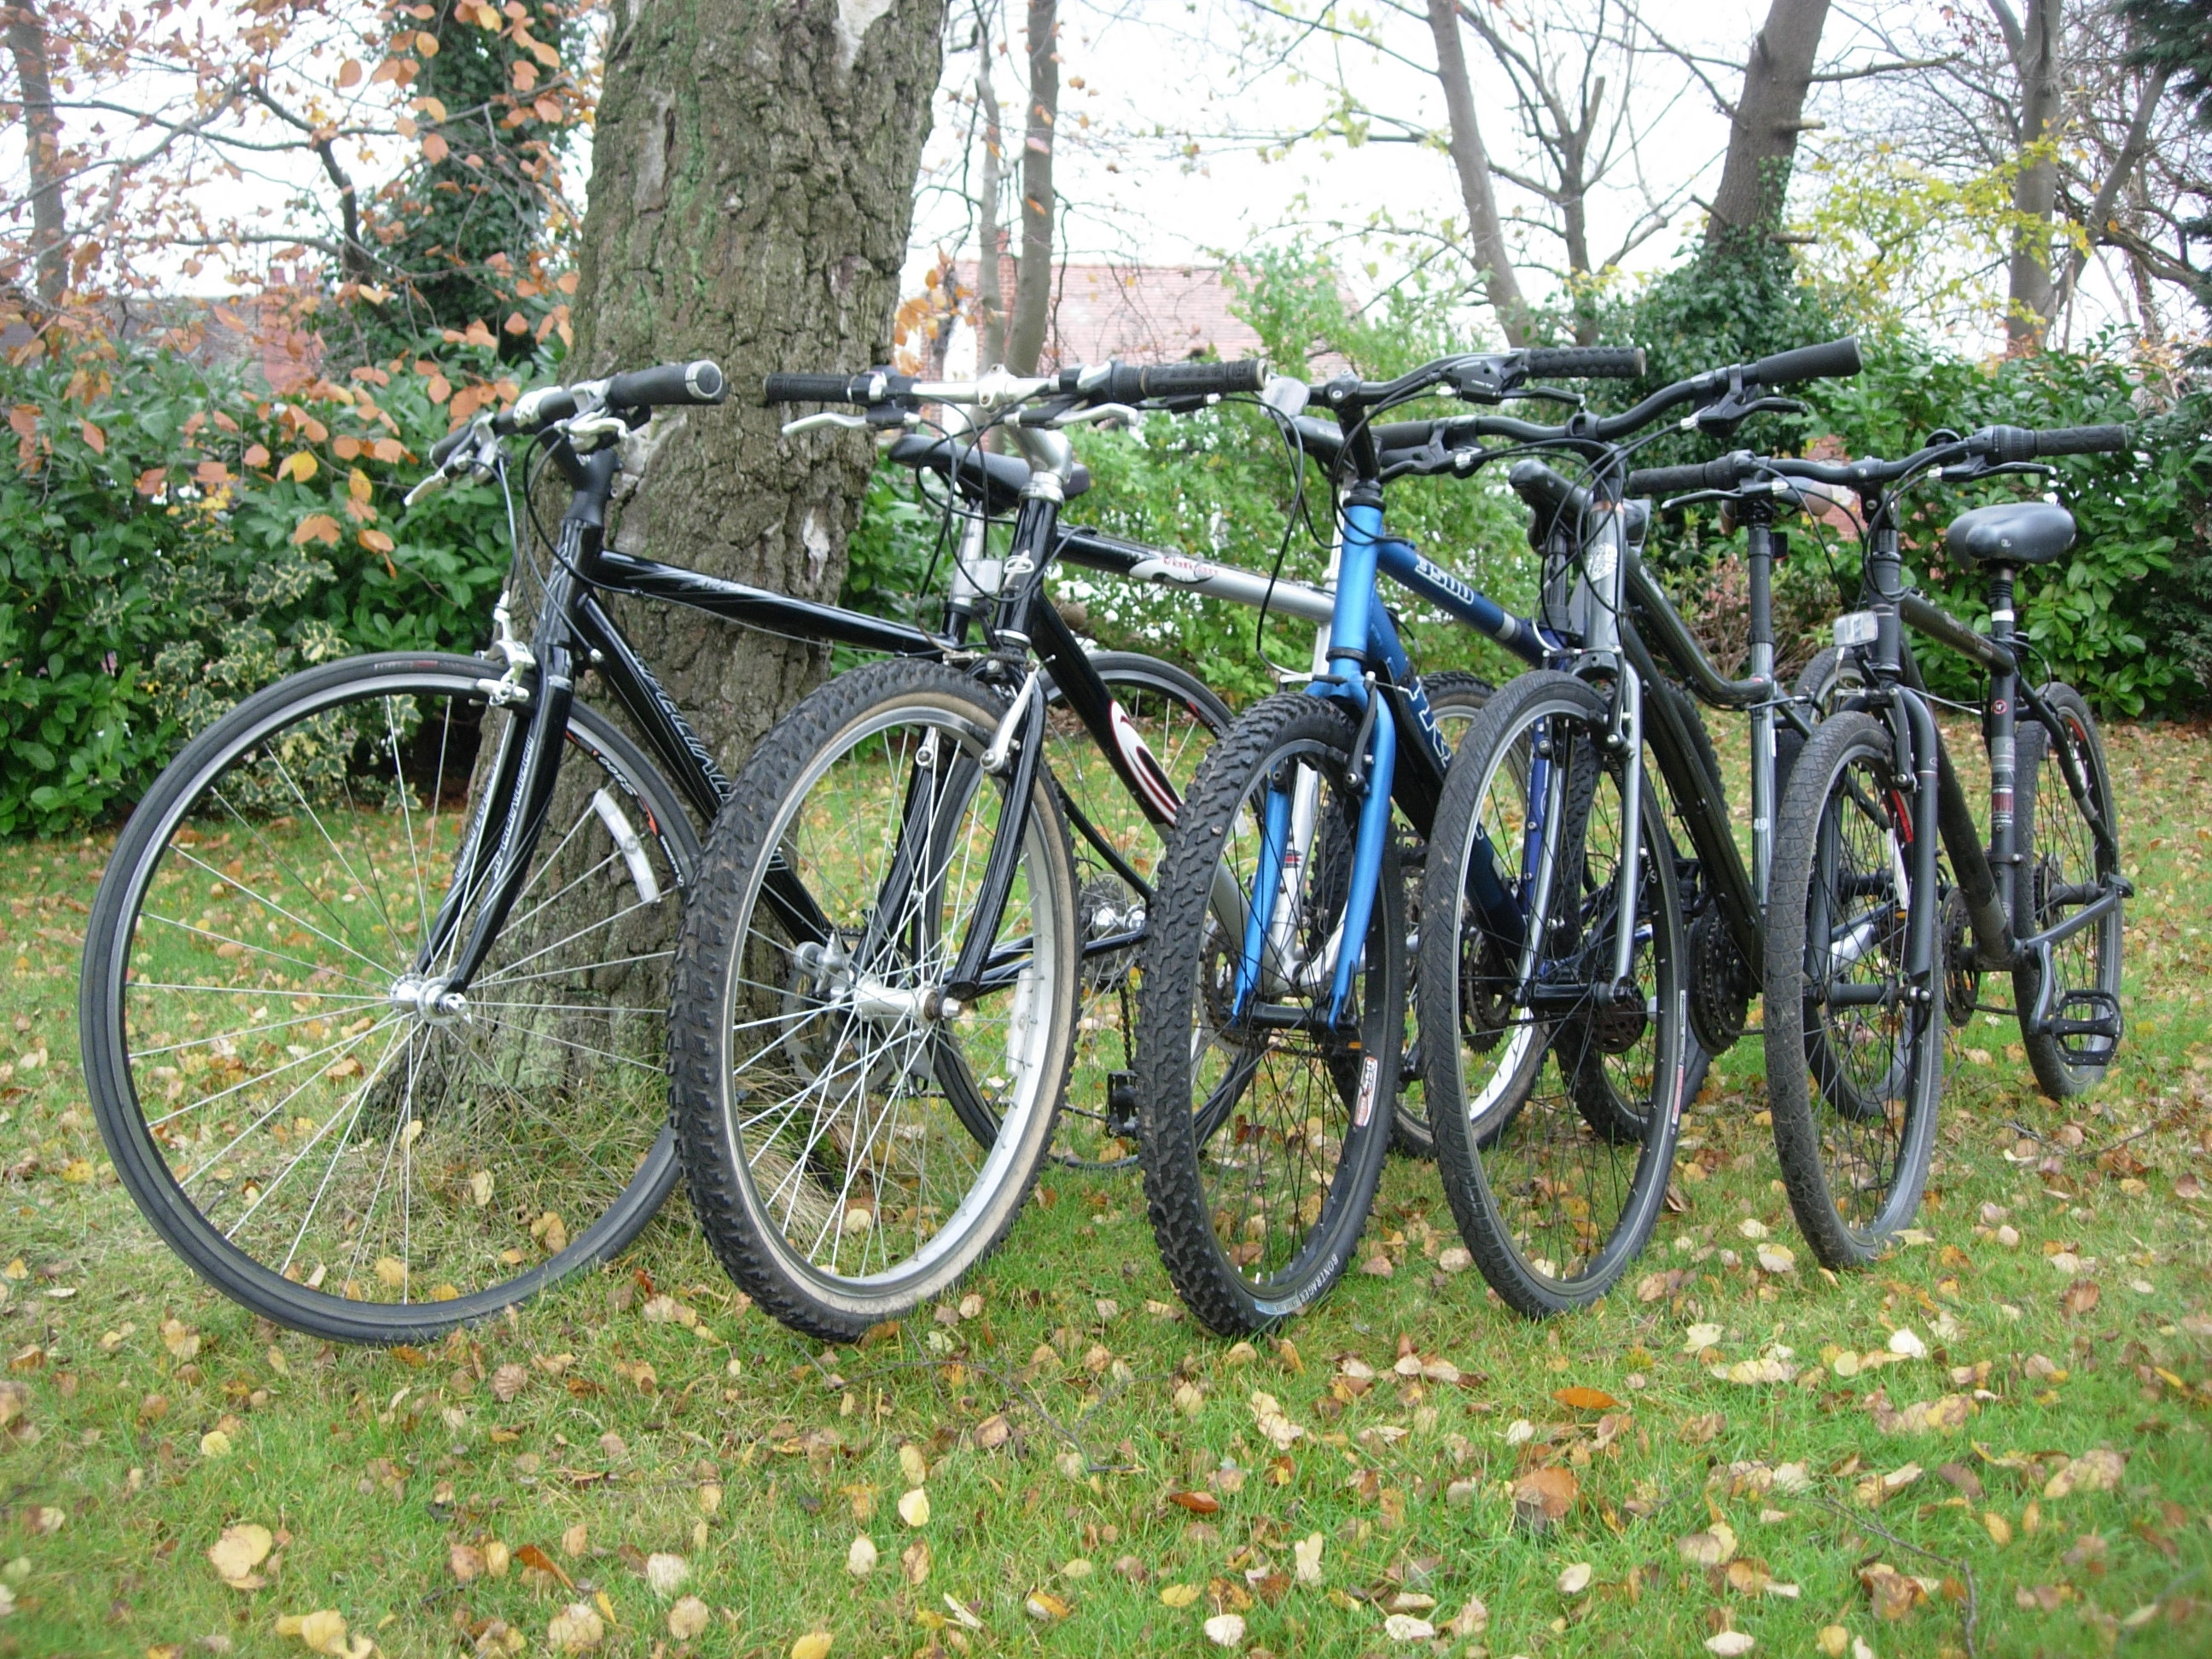 Plenty of bicycles to rent at Barrusclet